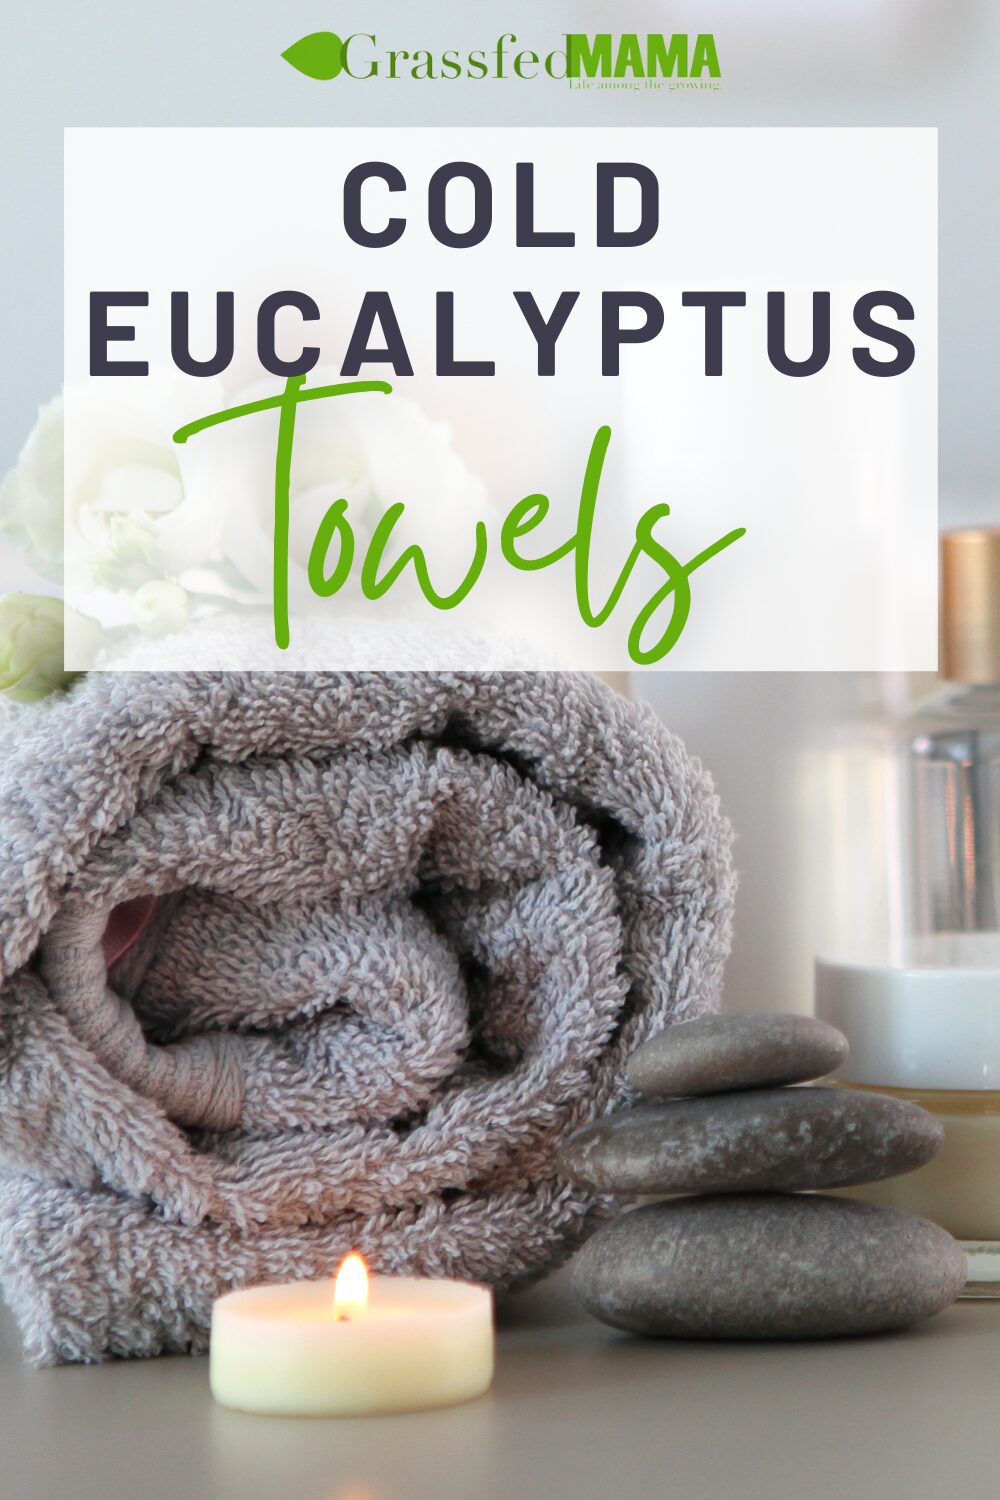 How to Make Cold Eucalyptus Towels